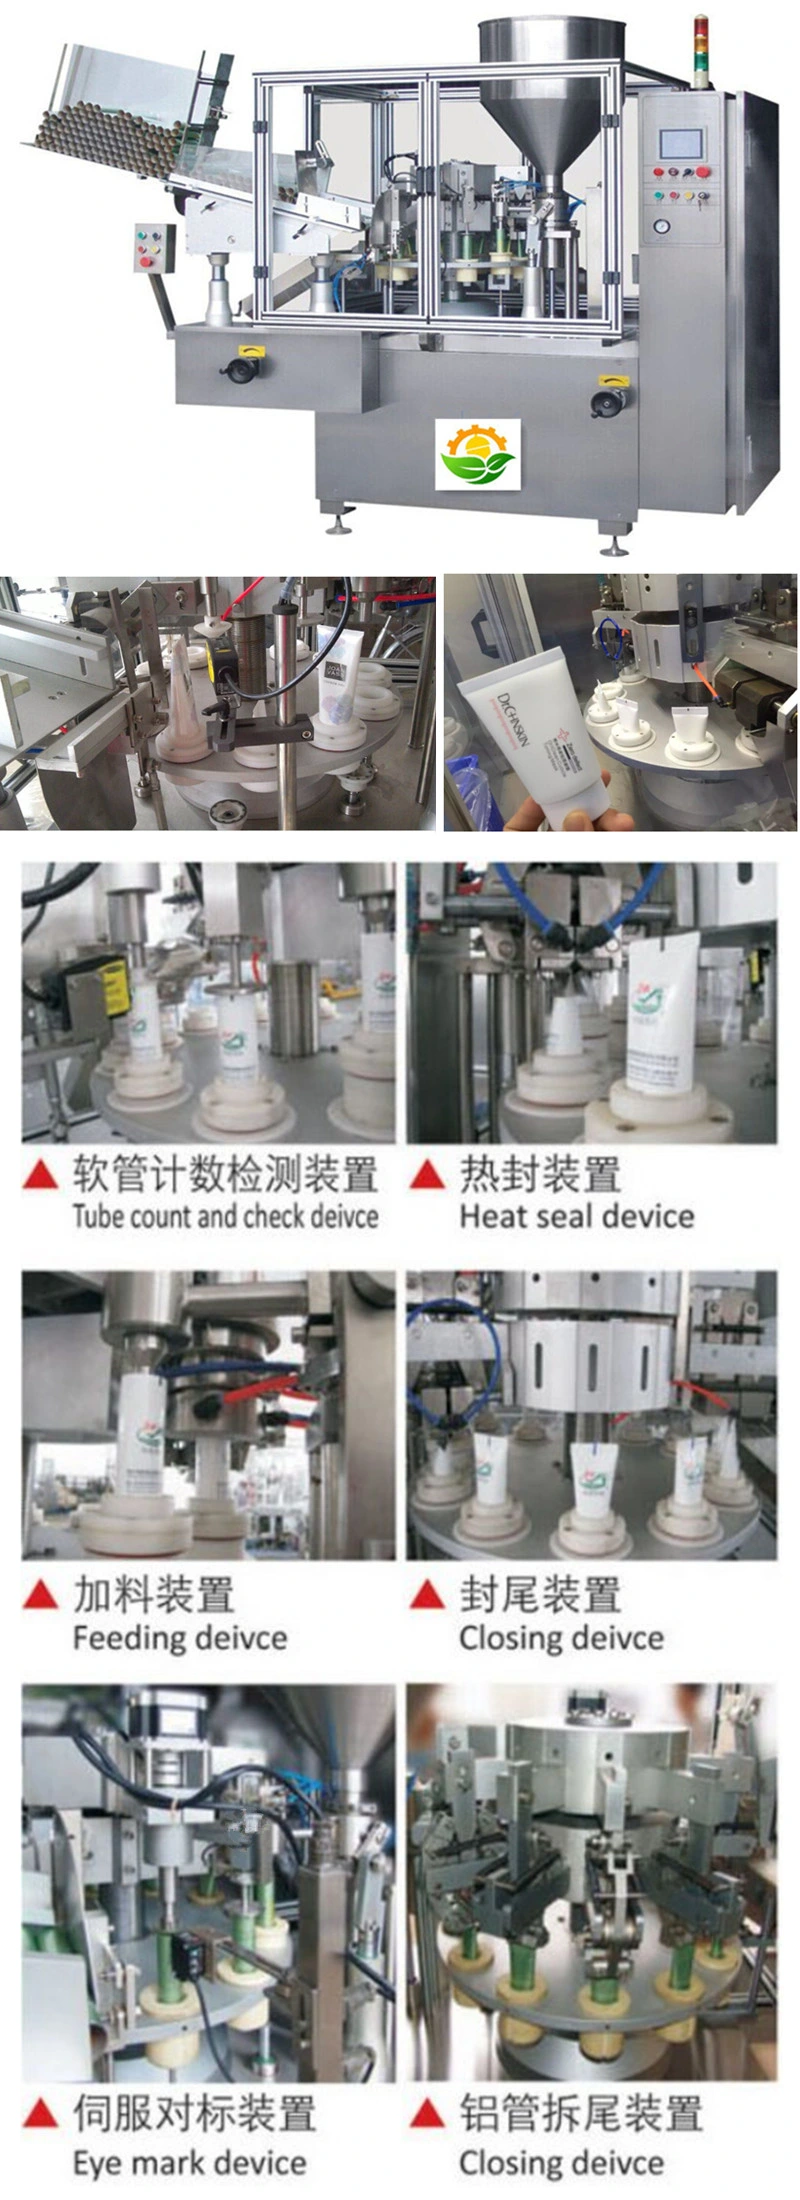 500ml/250ml 8.8 Oz Alcohol Hand Sanitizer Tube Fill and Seal Machine Tube Filling Machine Automatic